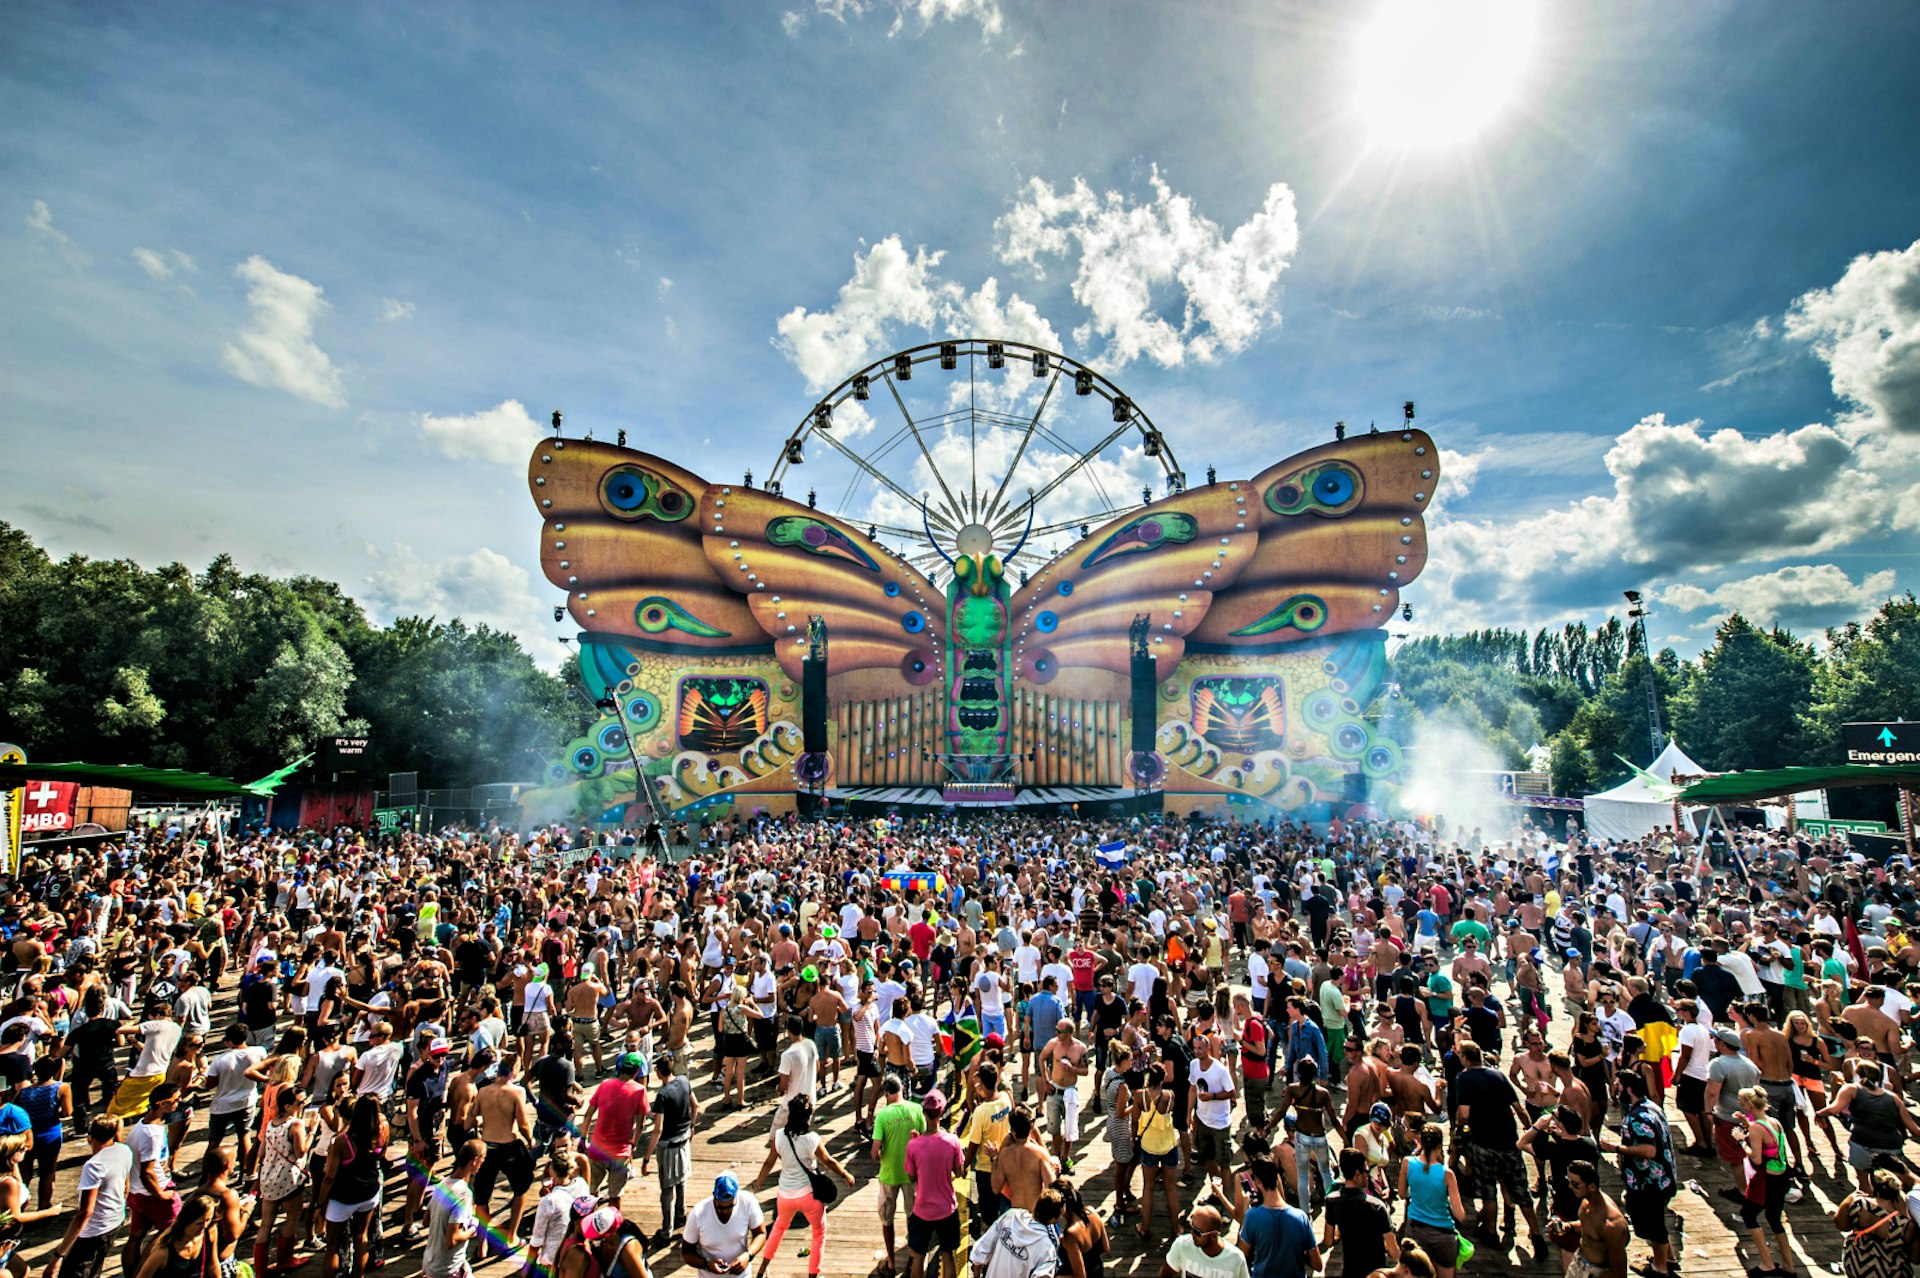 The crowd waits in front of a butterfly stage and a ferris wheel during the third day of the ninth edition of the Tomorrowland music festival